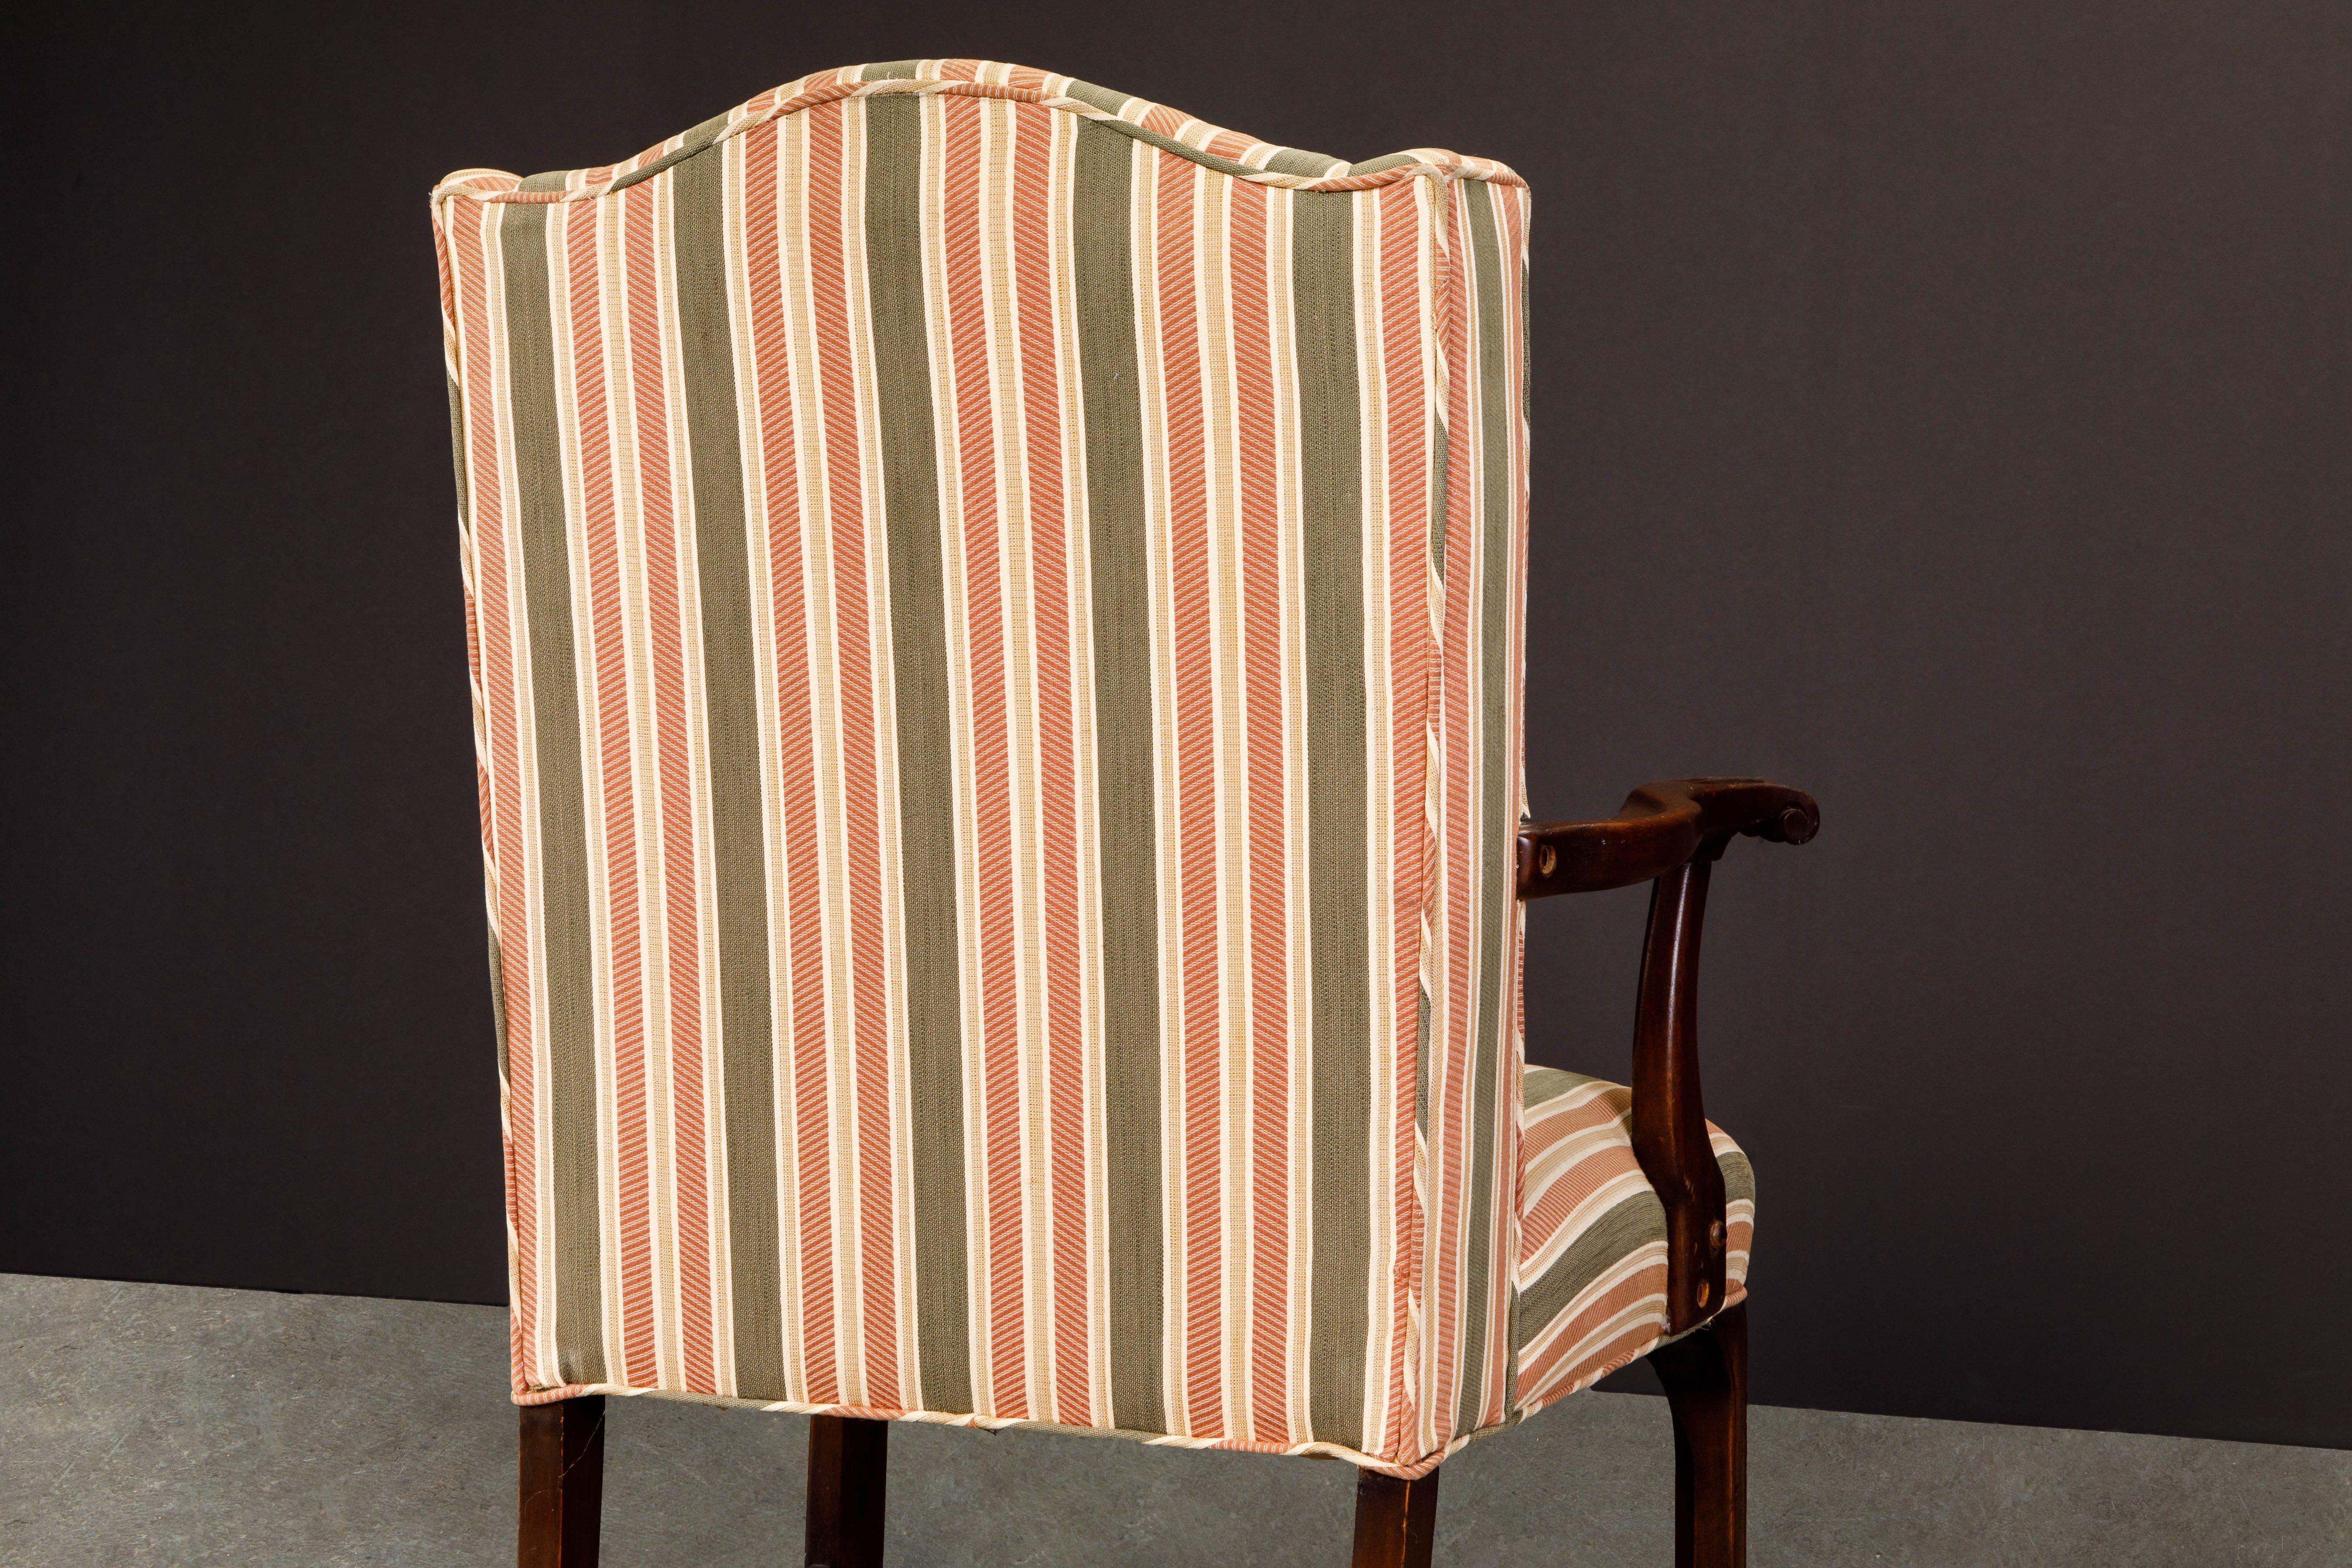 Gainsborough Wingback Armchair Upholstered in Striped Fabric 13